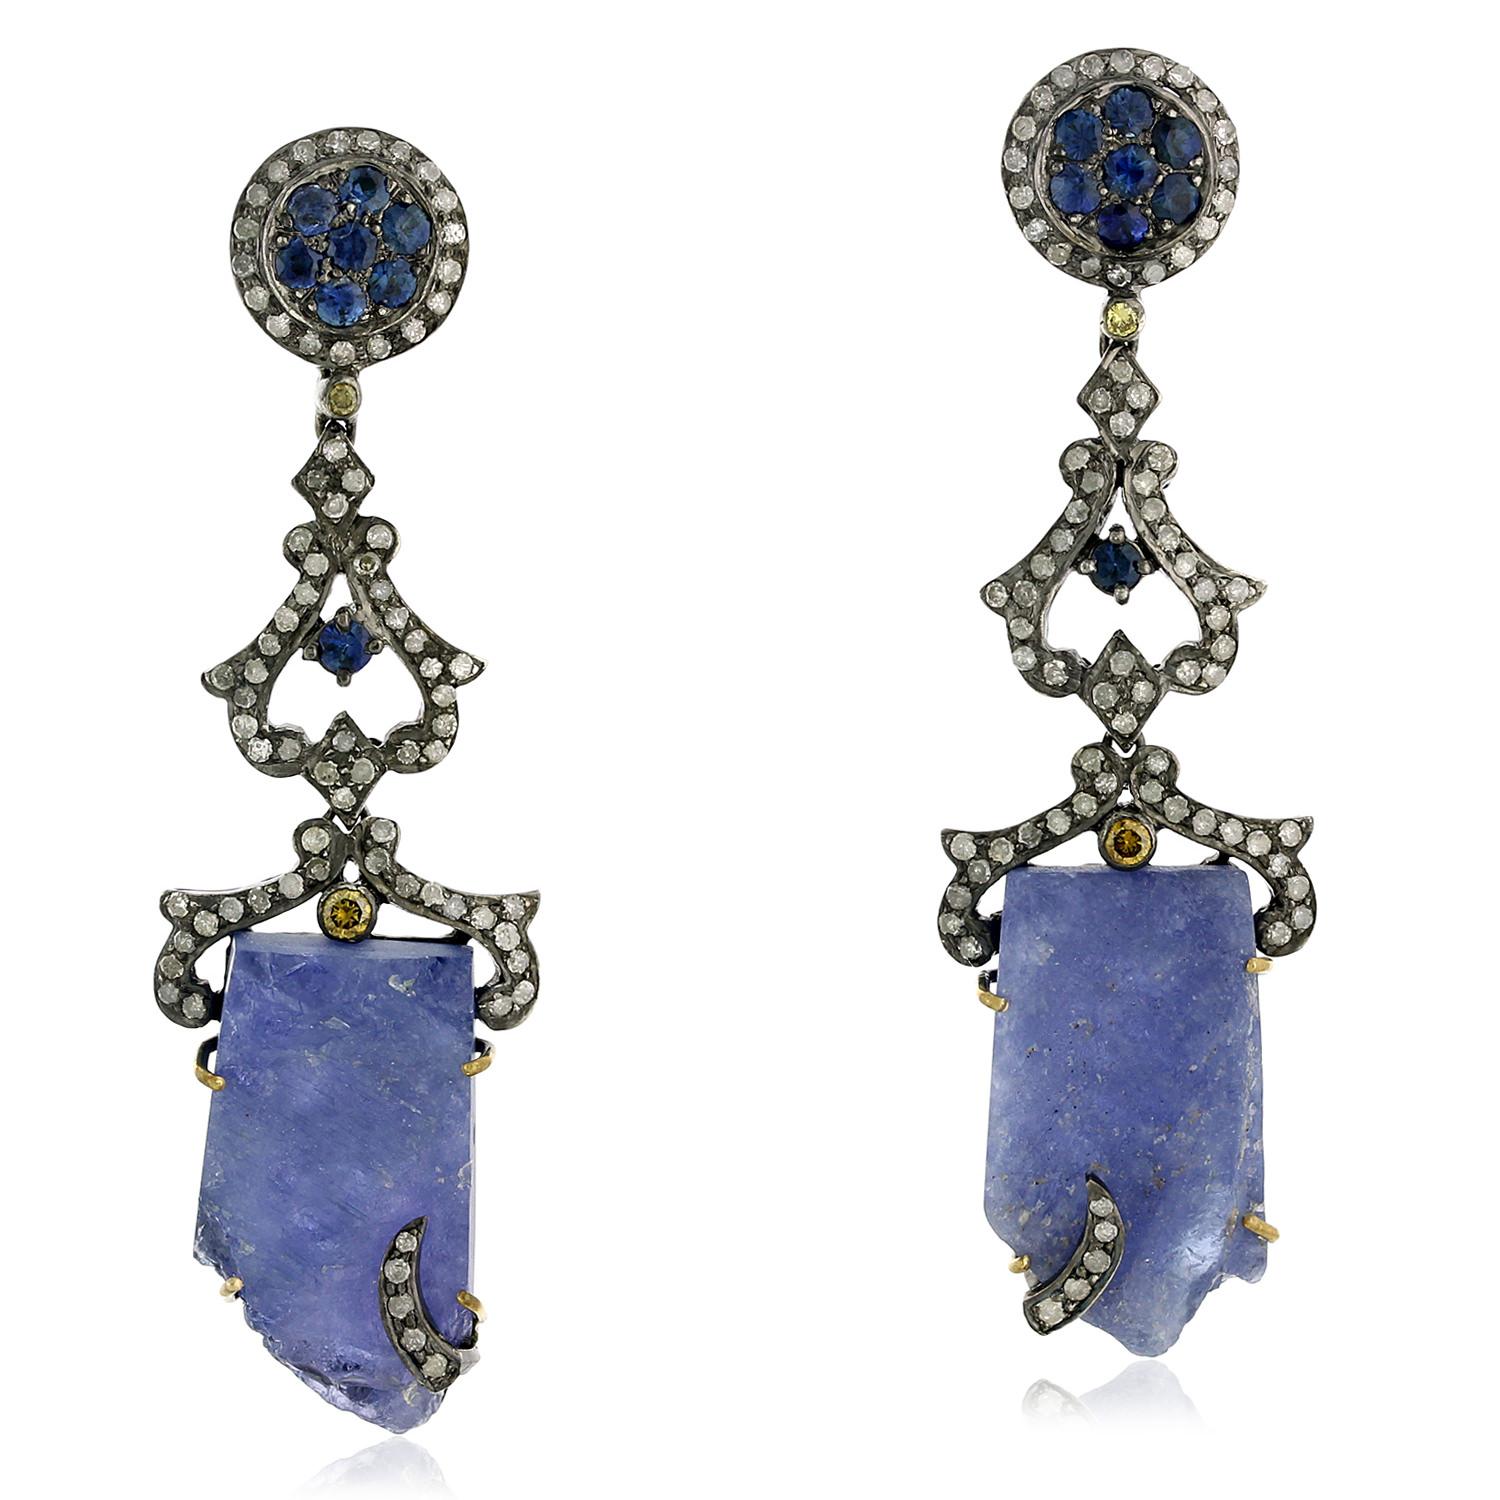 Mixed Cut Rough Tanzanite Earrings With Sapphires & Pave Diamonds In 18k Gold & Silver For Sale